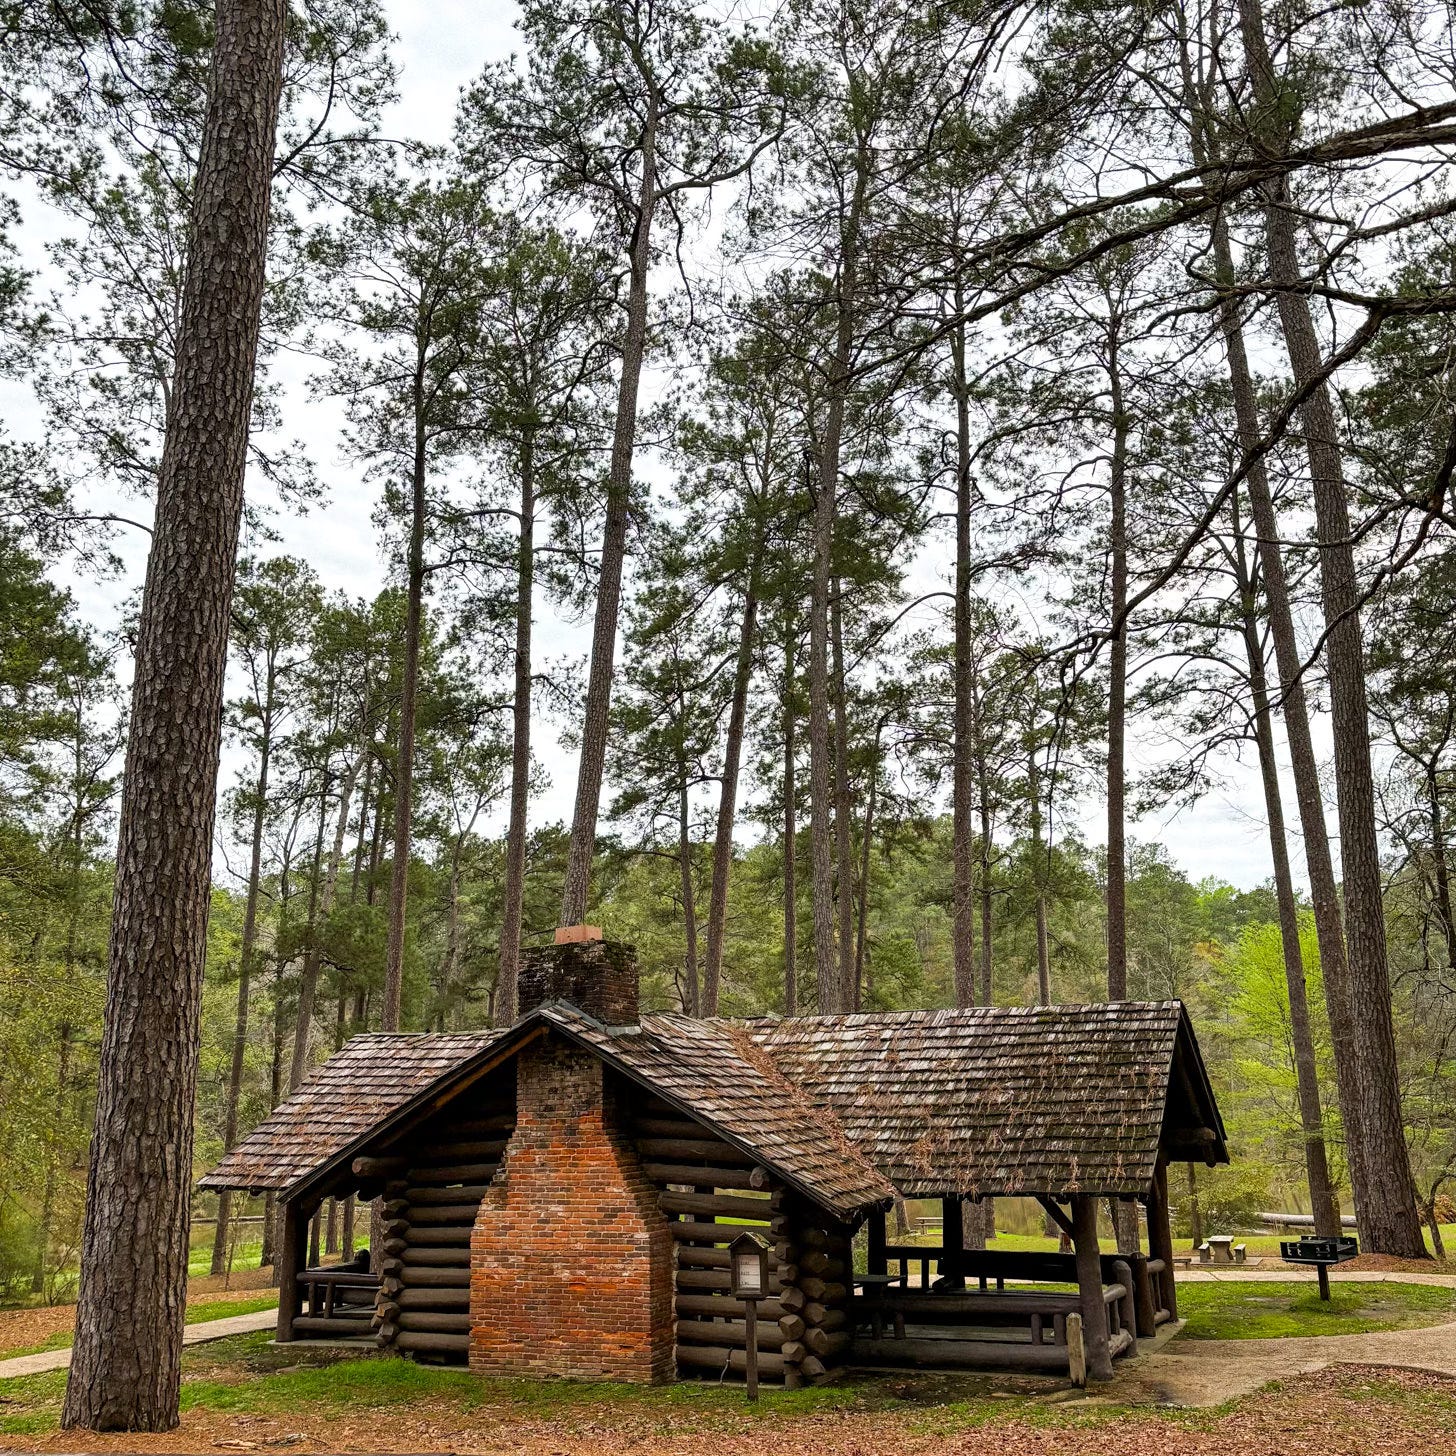 A rustic log shelter with brick fireplace surrounded by tall pine trees